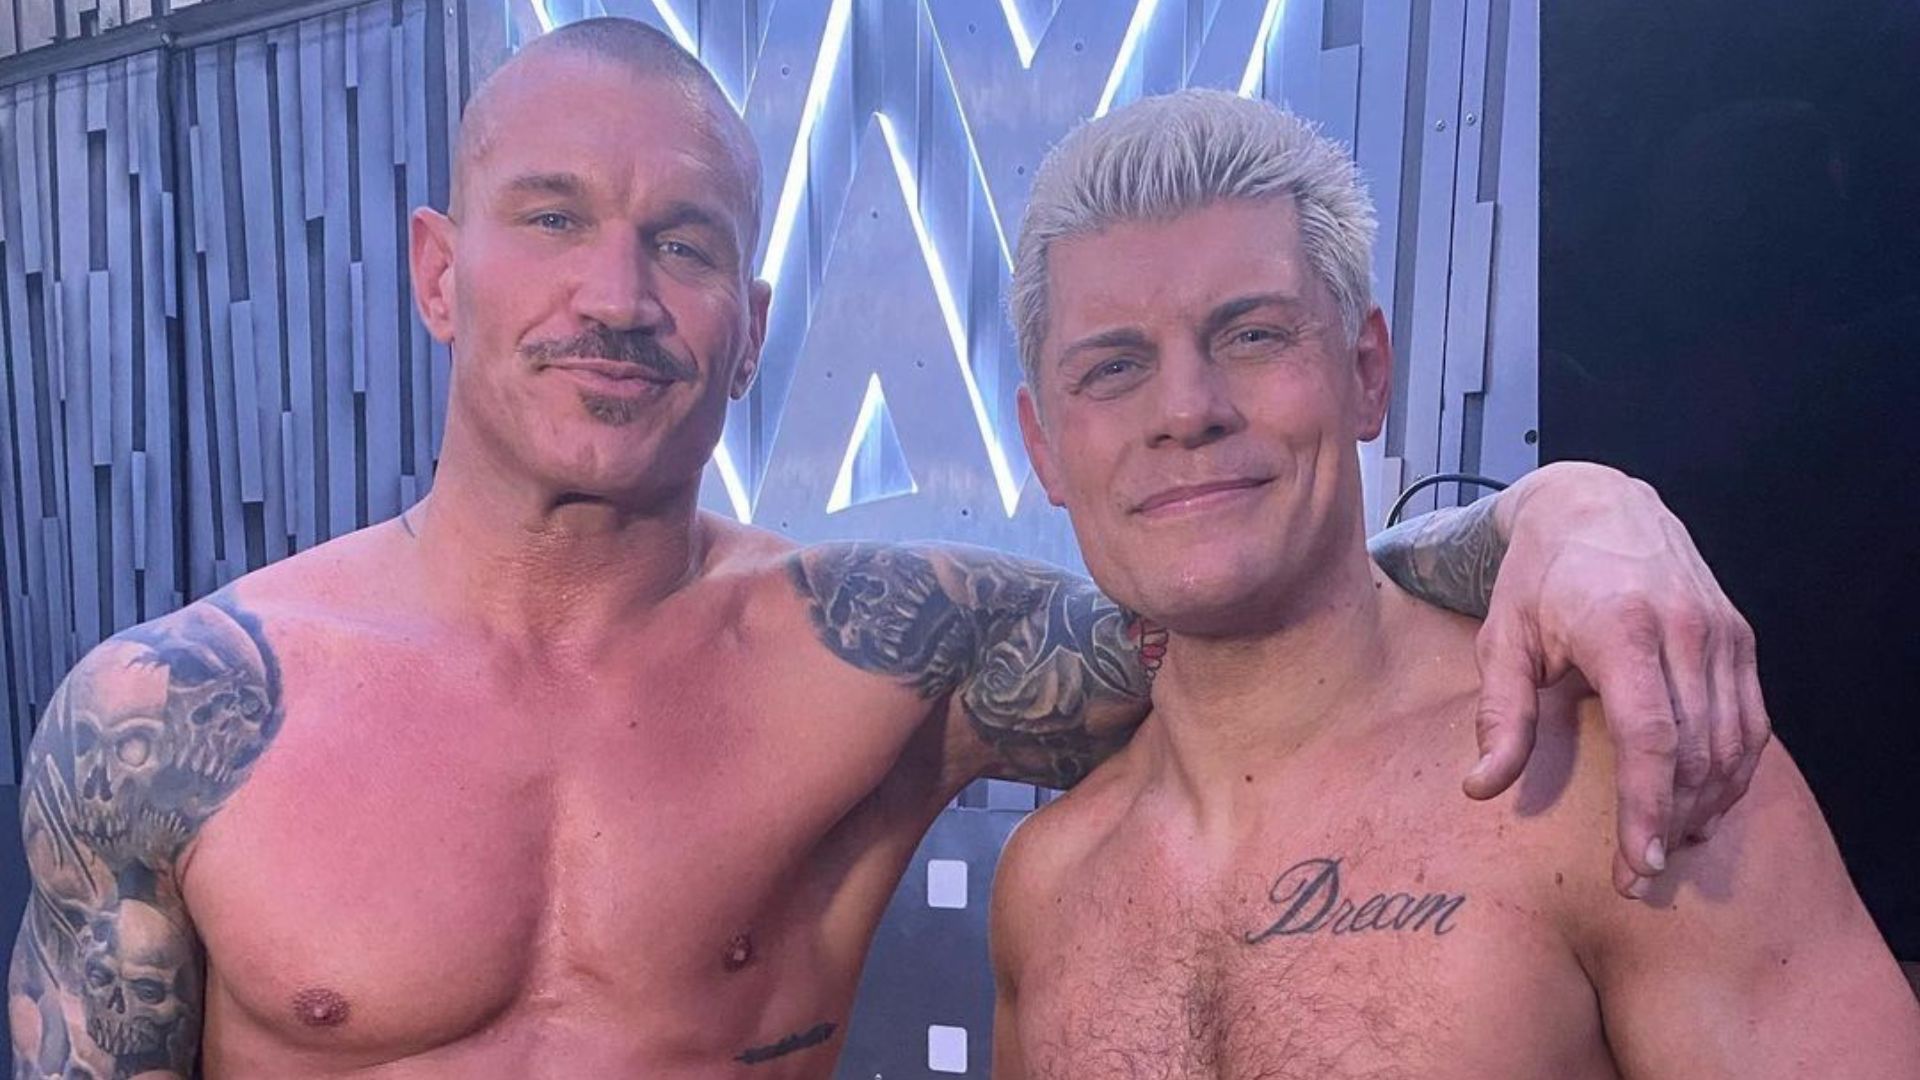 Randy Orton and Cody Rhodes go way back in WWE (Image credit: Cody